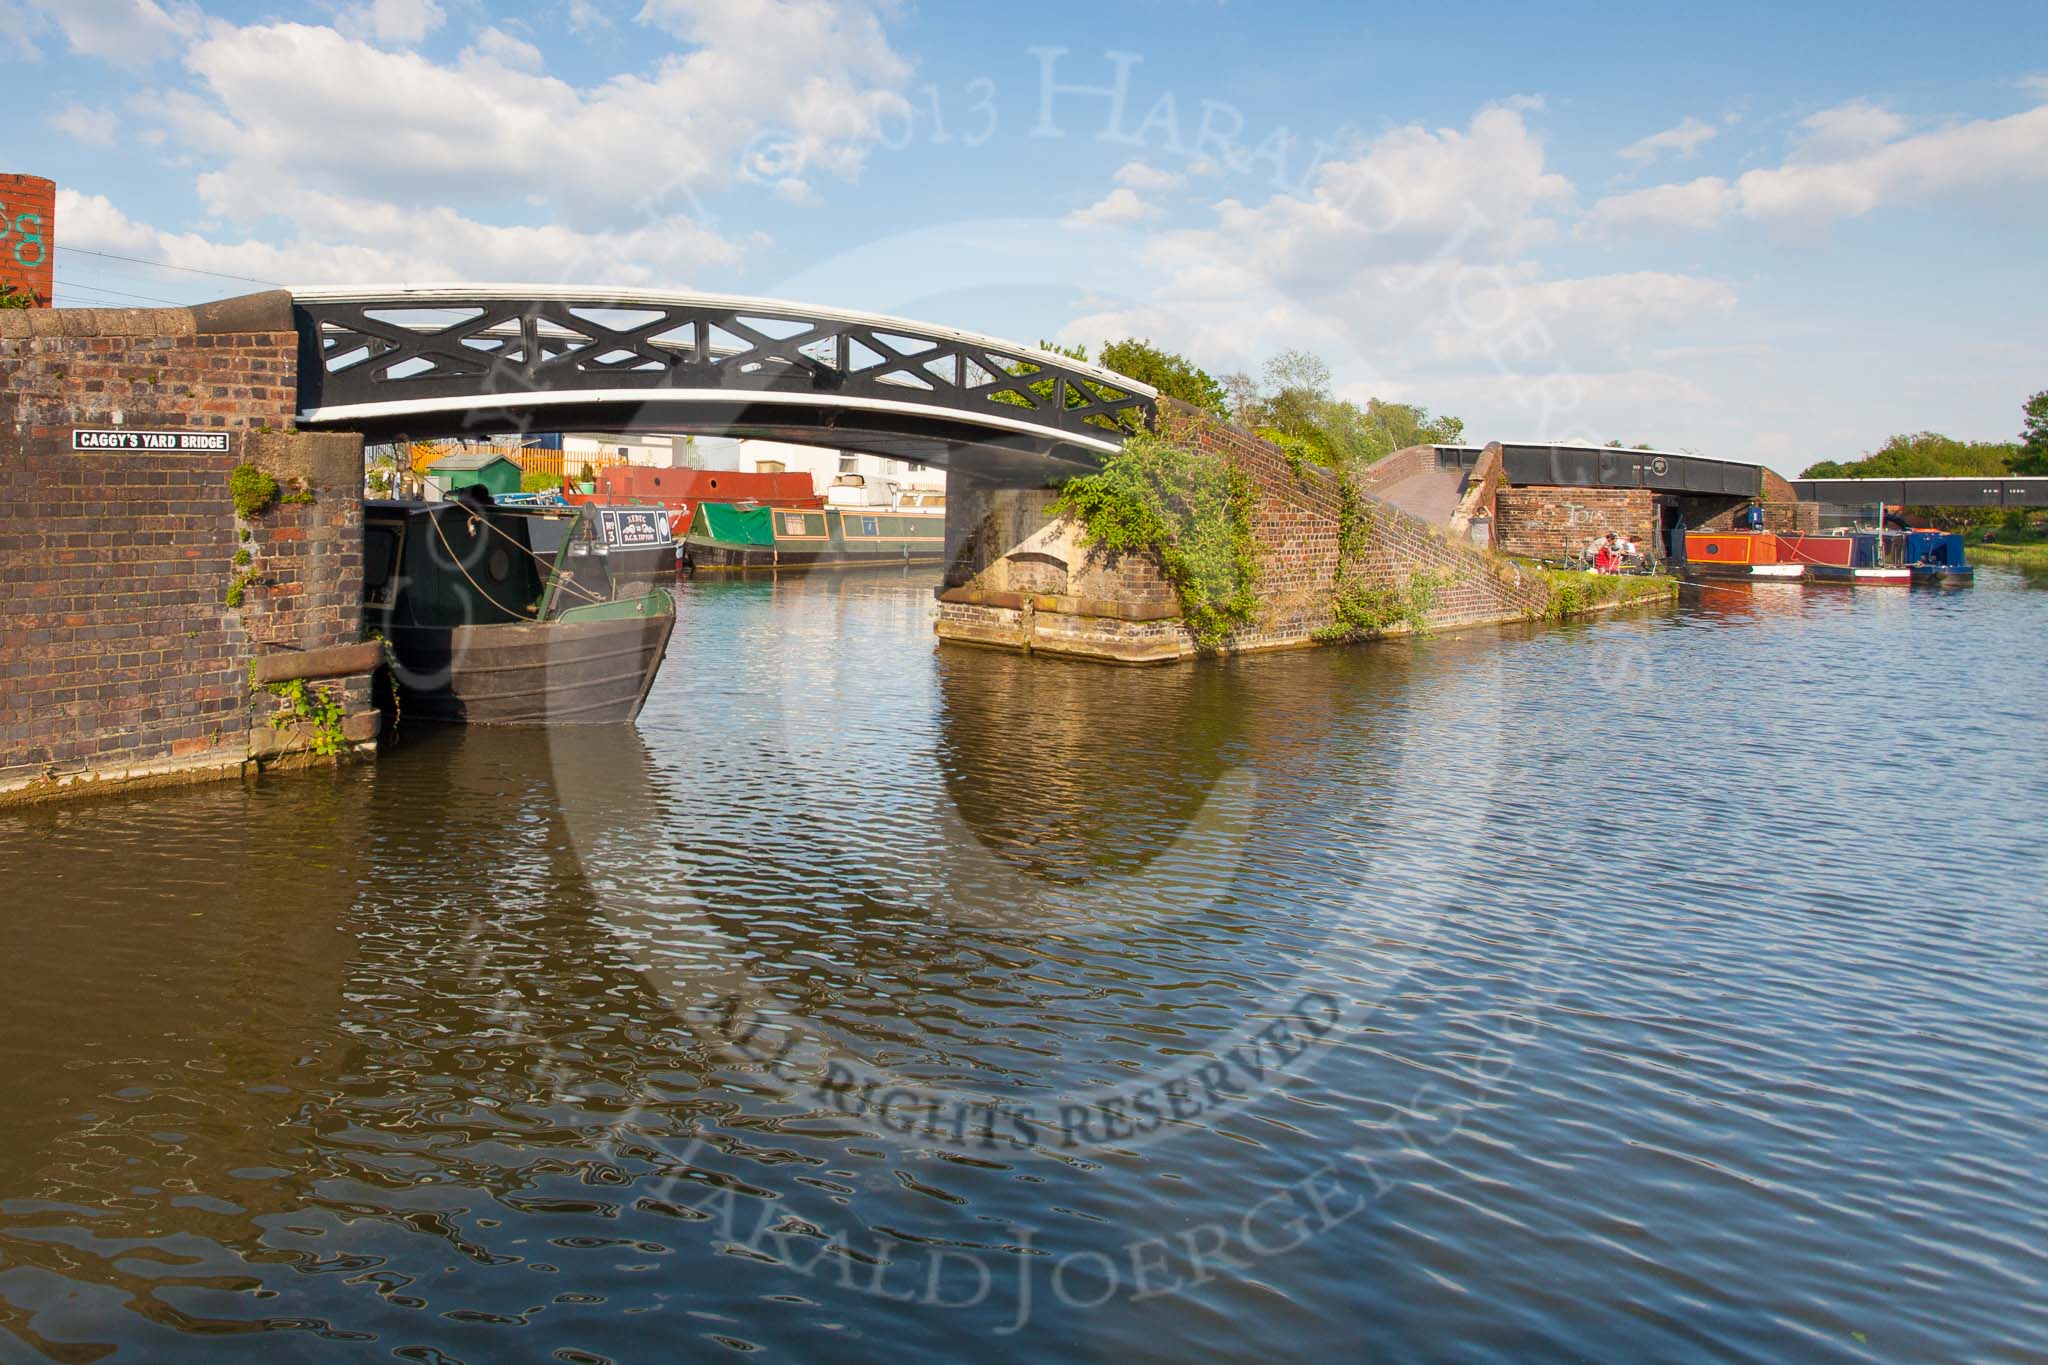 BCN Marathon Challenge 2013: The BCN New Main Line in Tipton, below Factory Locks. The boatyard on the left uses the remains of a former railway interchange basin..
Birmingham Canal Navigation,


United Kingdom,
on 25 May 2013 at 18:17, image #270